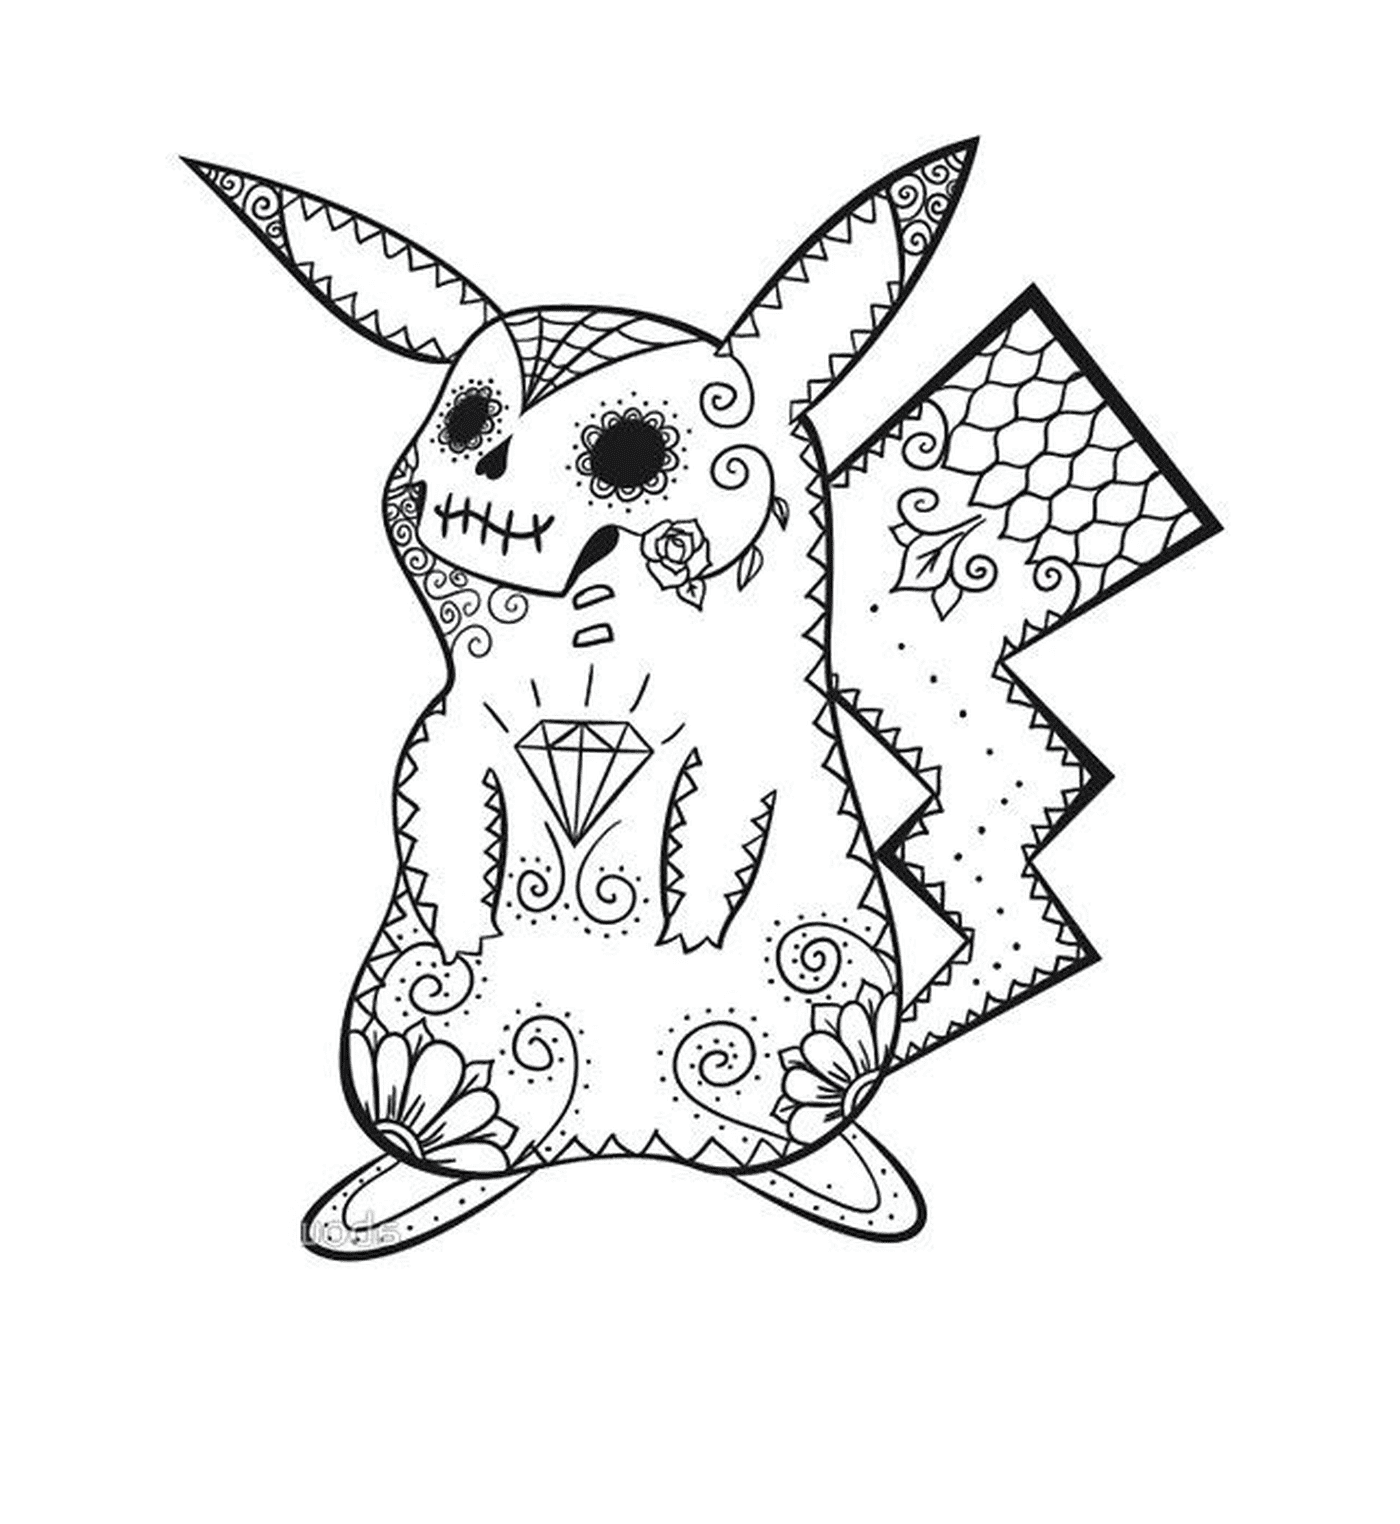  A Pikachu with a head of death 